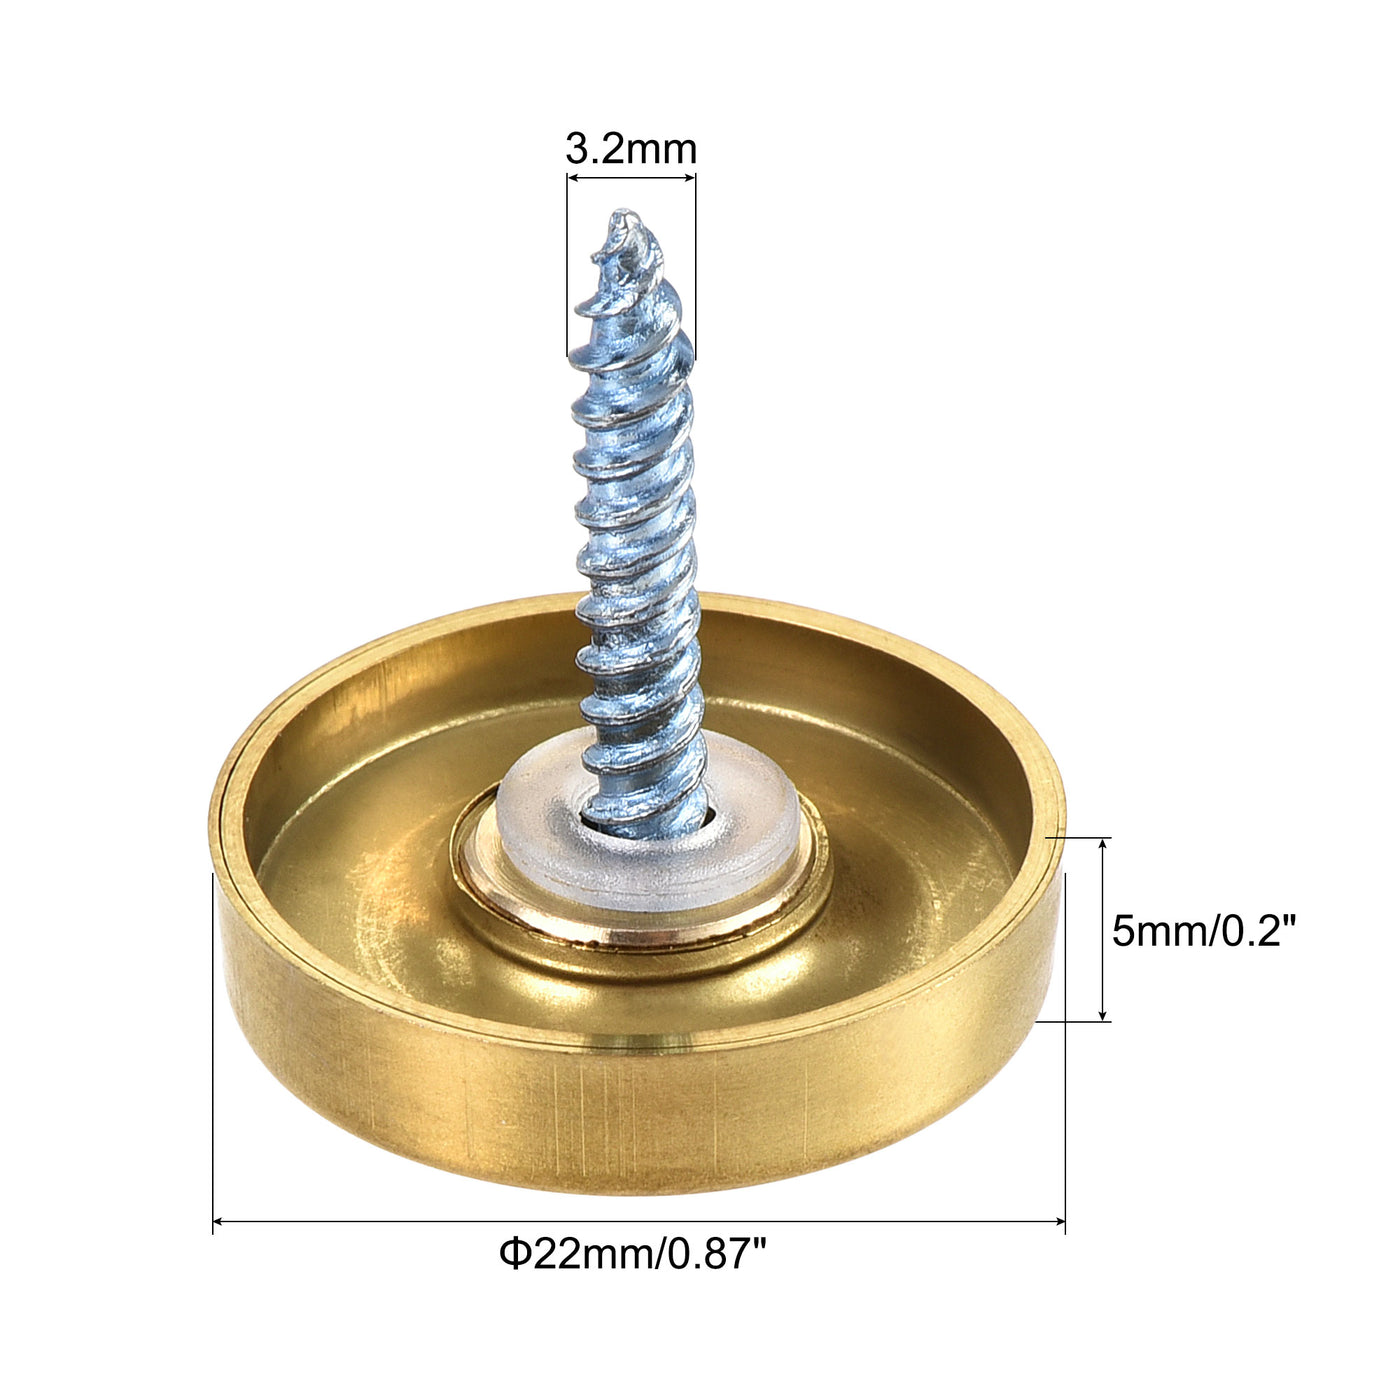 uxcell Uxcell Mirror Screws, 22mm/0.87", 10pcs Decorative Cap Fasteners Cover Nails, Wire Drawing, Gold Tone 304 Stainless Steel